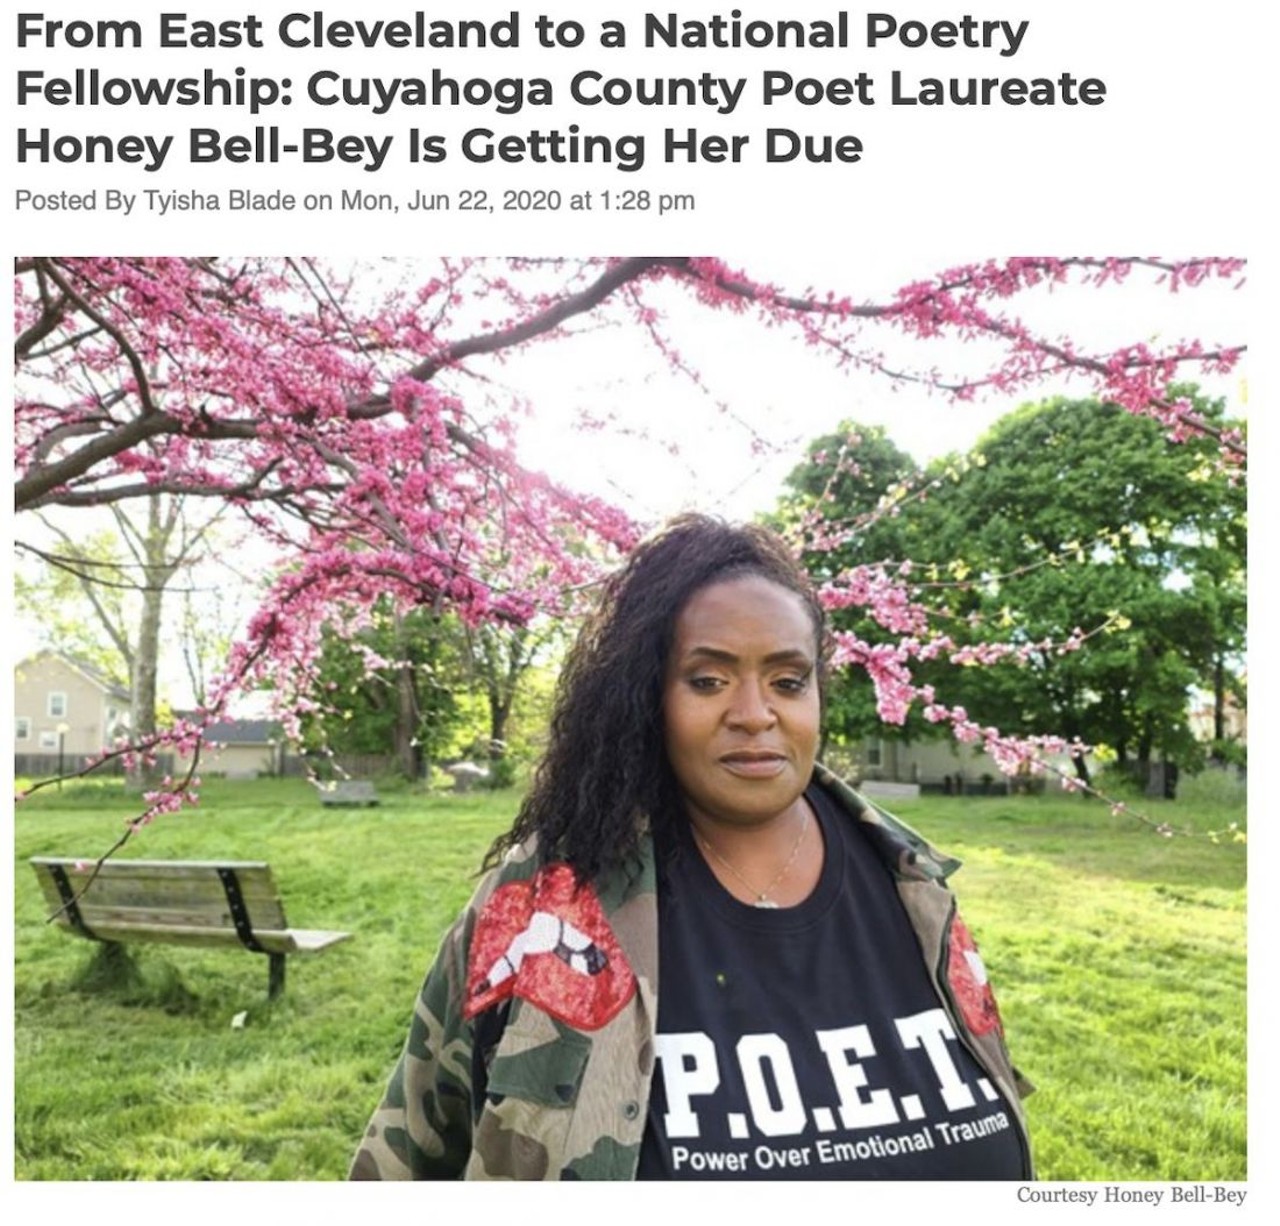  &#147;From East Cleveland to a National Poetry Fellowship: Cuyahoga County Poet Laureate Honey Bell-Bey Is Getting Her Due&#148;
June 22nd
&#147;Cuyahoga County poet laureate Honey Bell-Bey recently received an award from the Academy of American Poets Laureate Fellowships. The prizes, $50,000 to $100,000 in range, are unrestricted awards given to commend poets appointed to serve in civic positions.&#146;&#148;
Photo via Scene Archives